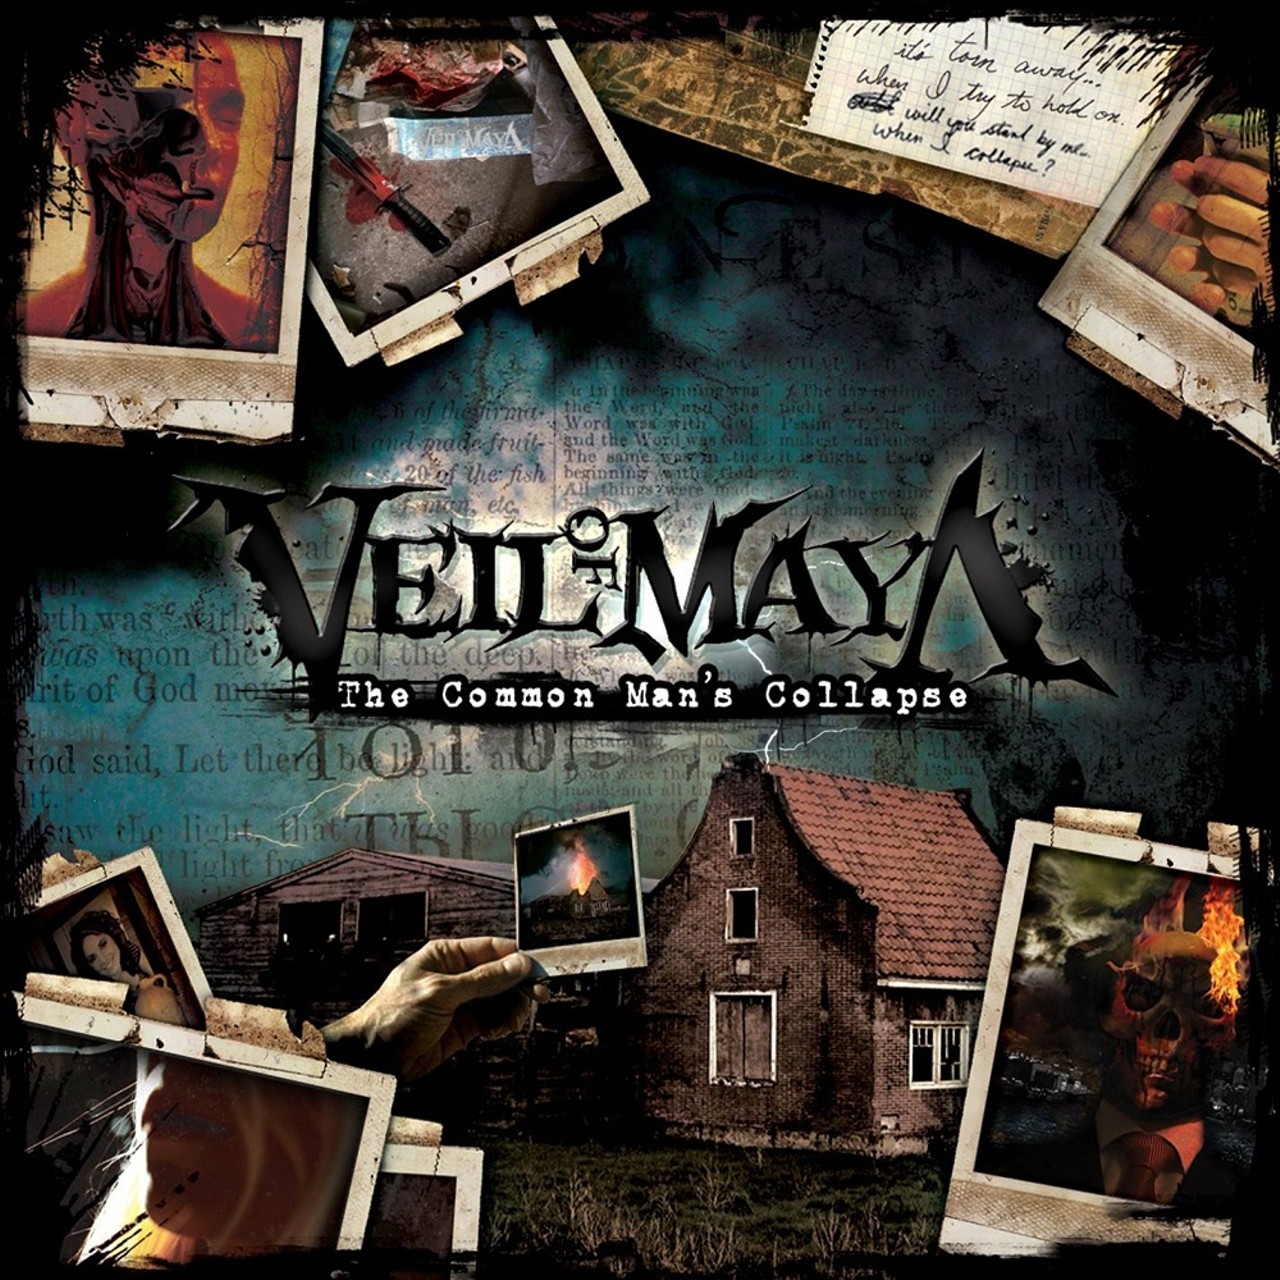 Veil of Maya
12/13 @ St. Andrew’s Hall, Detroit
Deathcore from Chicago. Don’t expect to sing along very often.